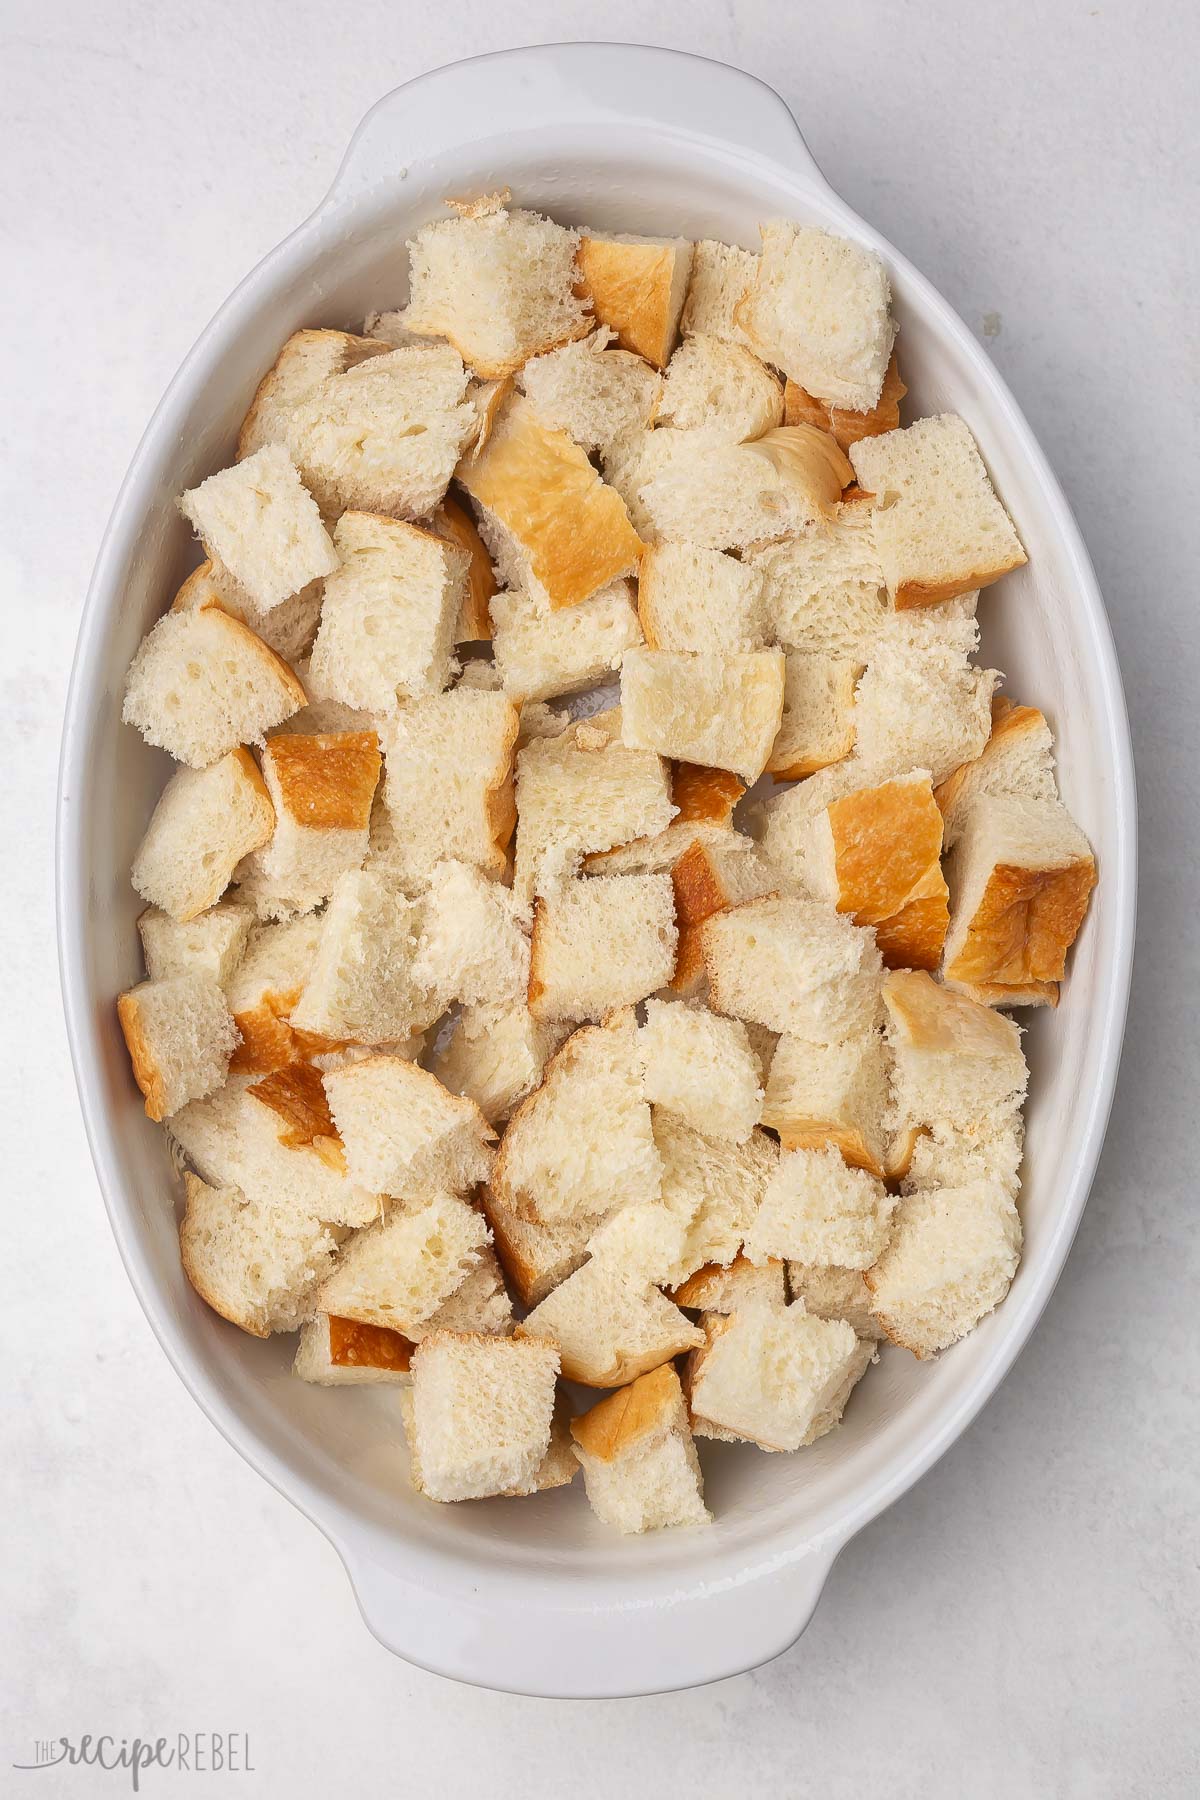 Top view of a casserole dish with cubes of bread lining the bottom in a single layer. 